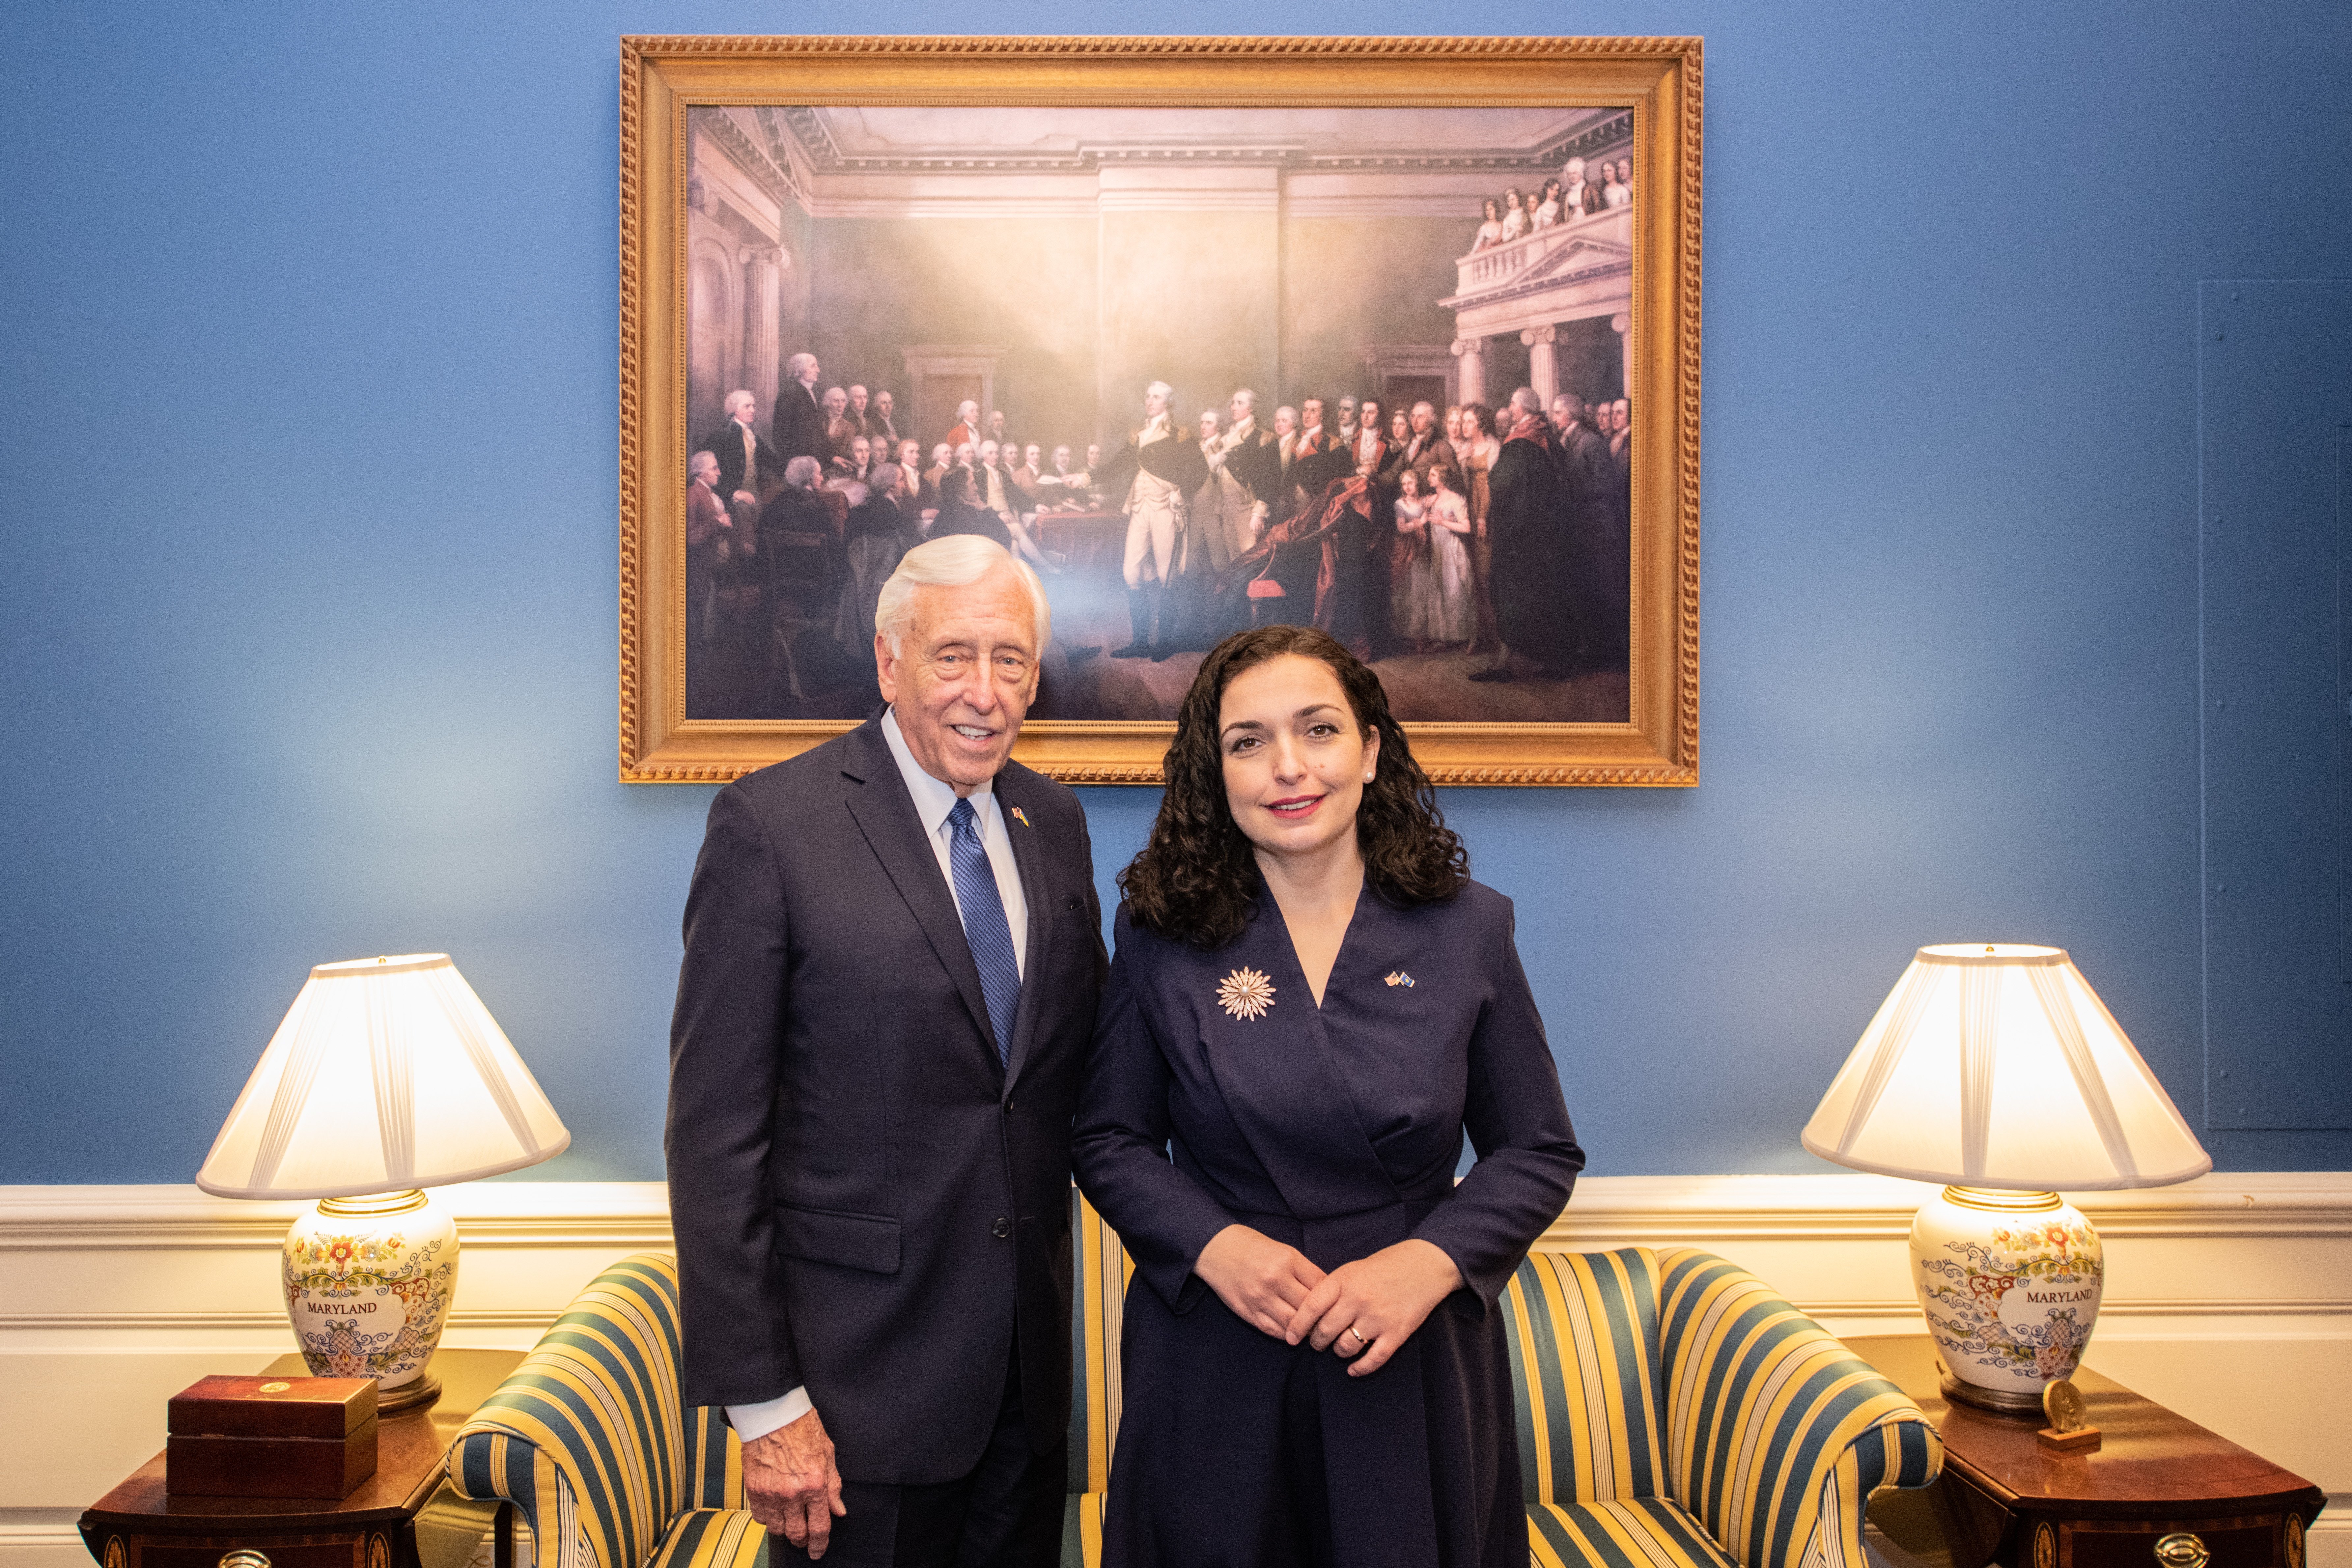 President Osmani met with the majority leader in the House of  Representatives Congressman Issa, and the co-chairs of the Committee on  Security and Cooperation in Europe of the US Congress - News